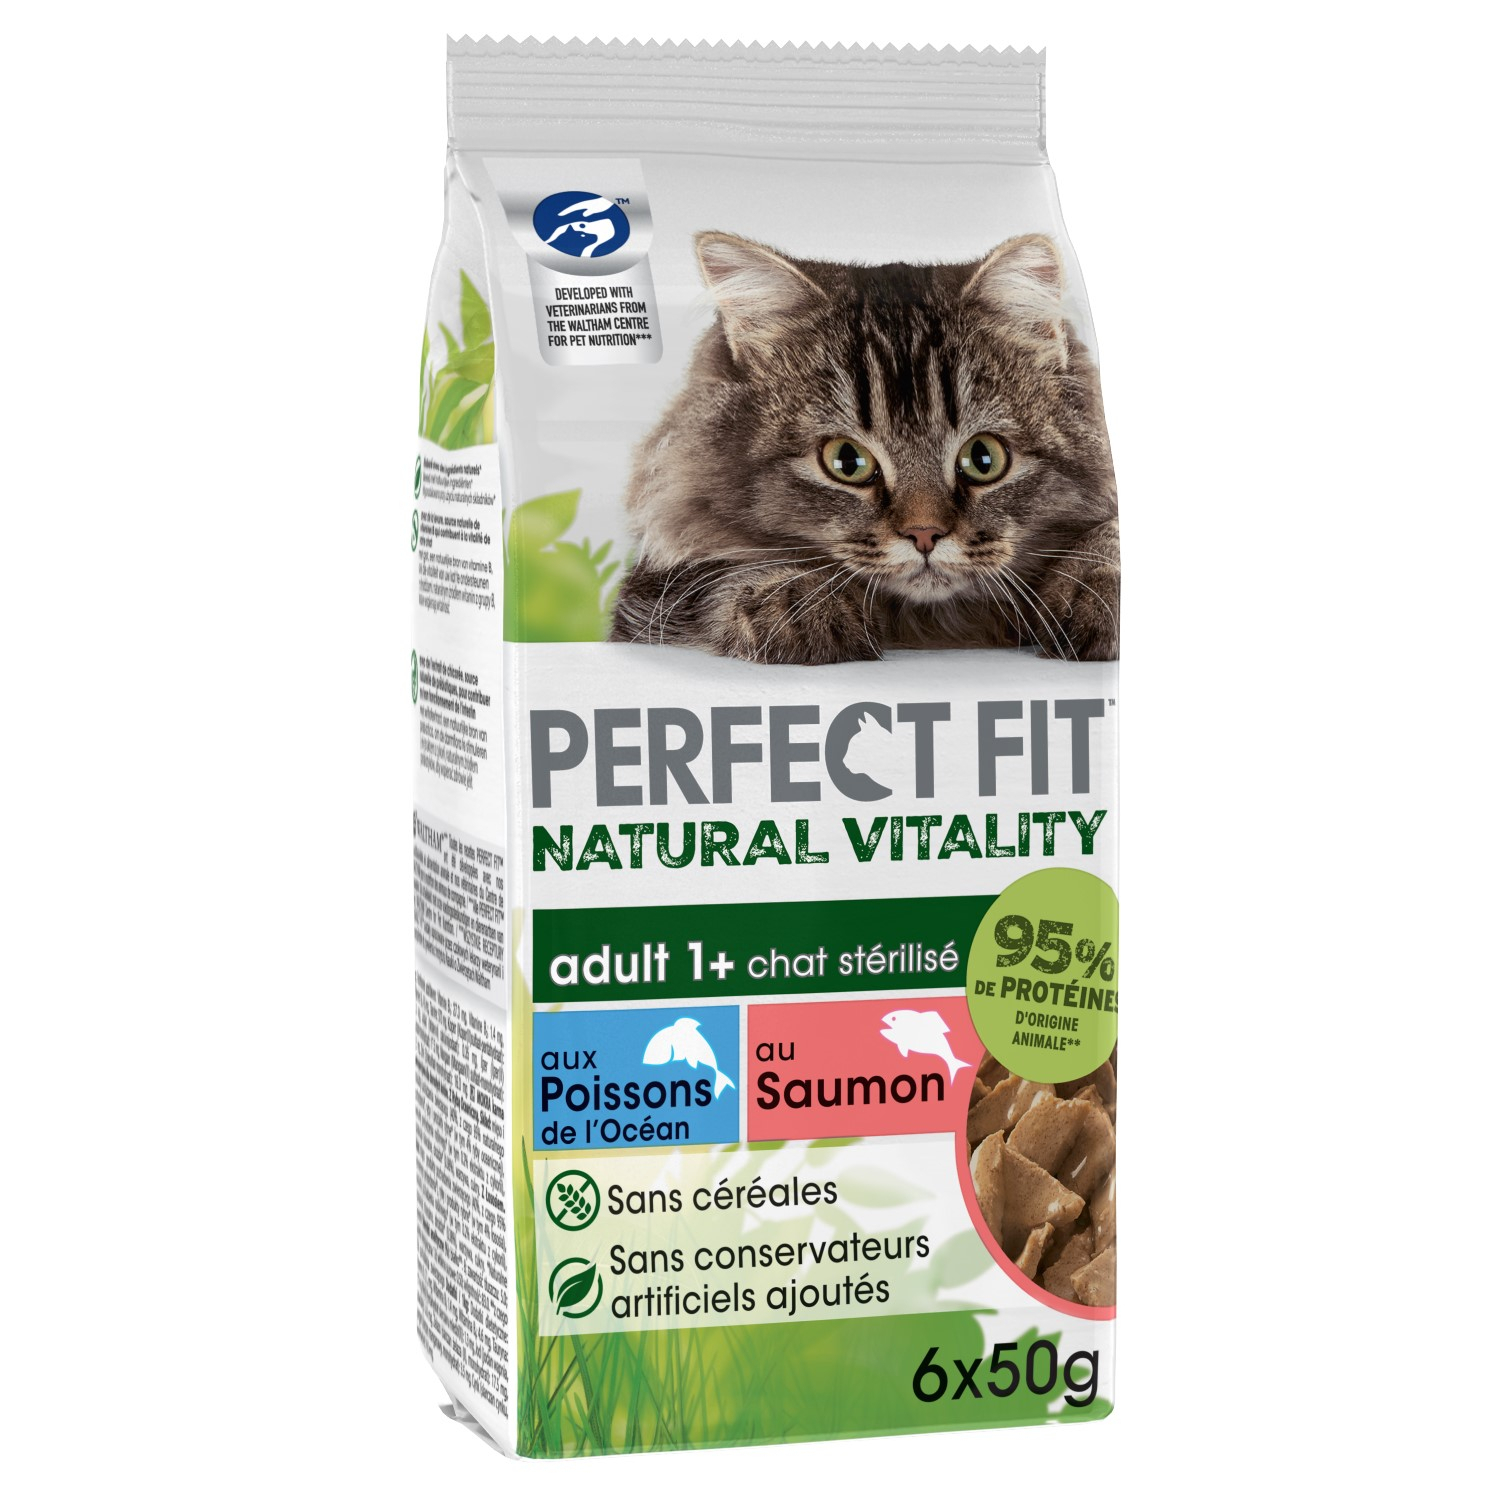 PERFECT FIT NATURAL VITALITY Adult Cat Sterilized